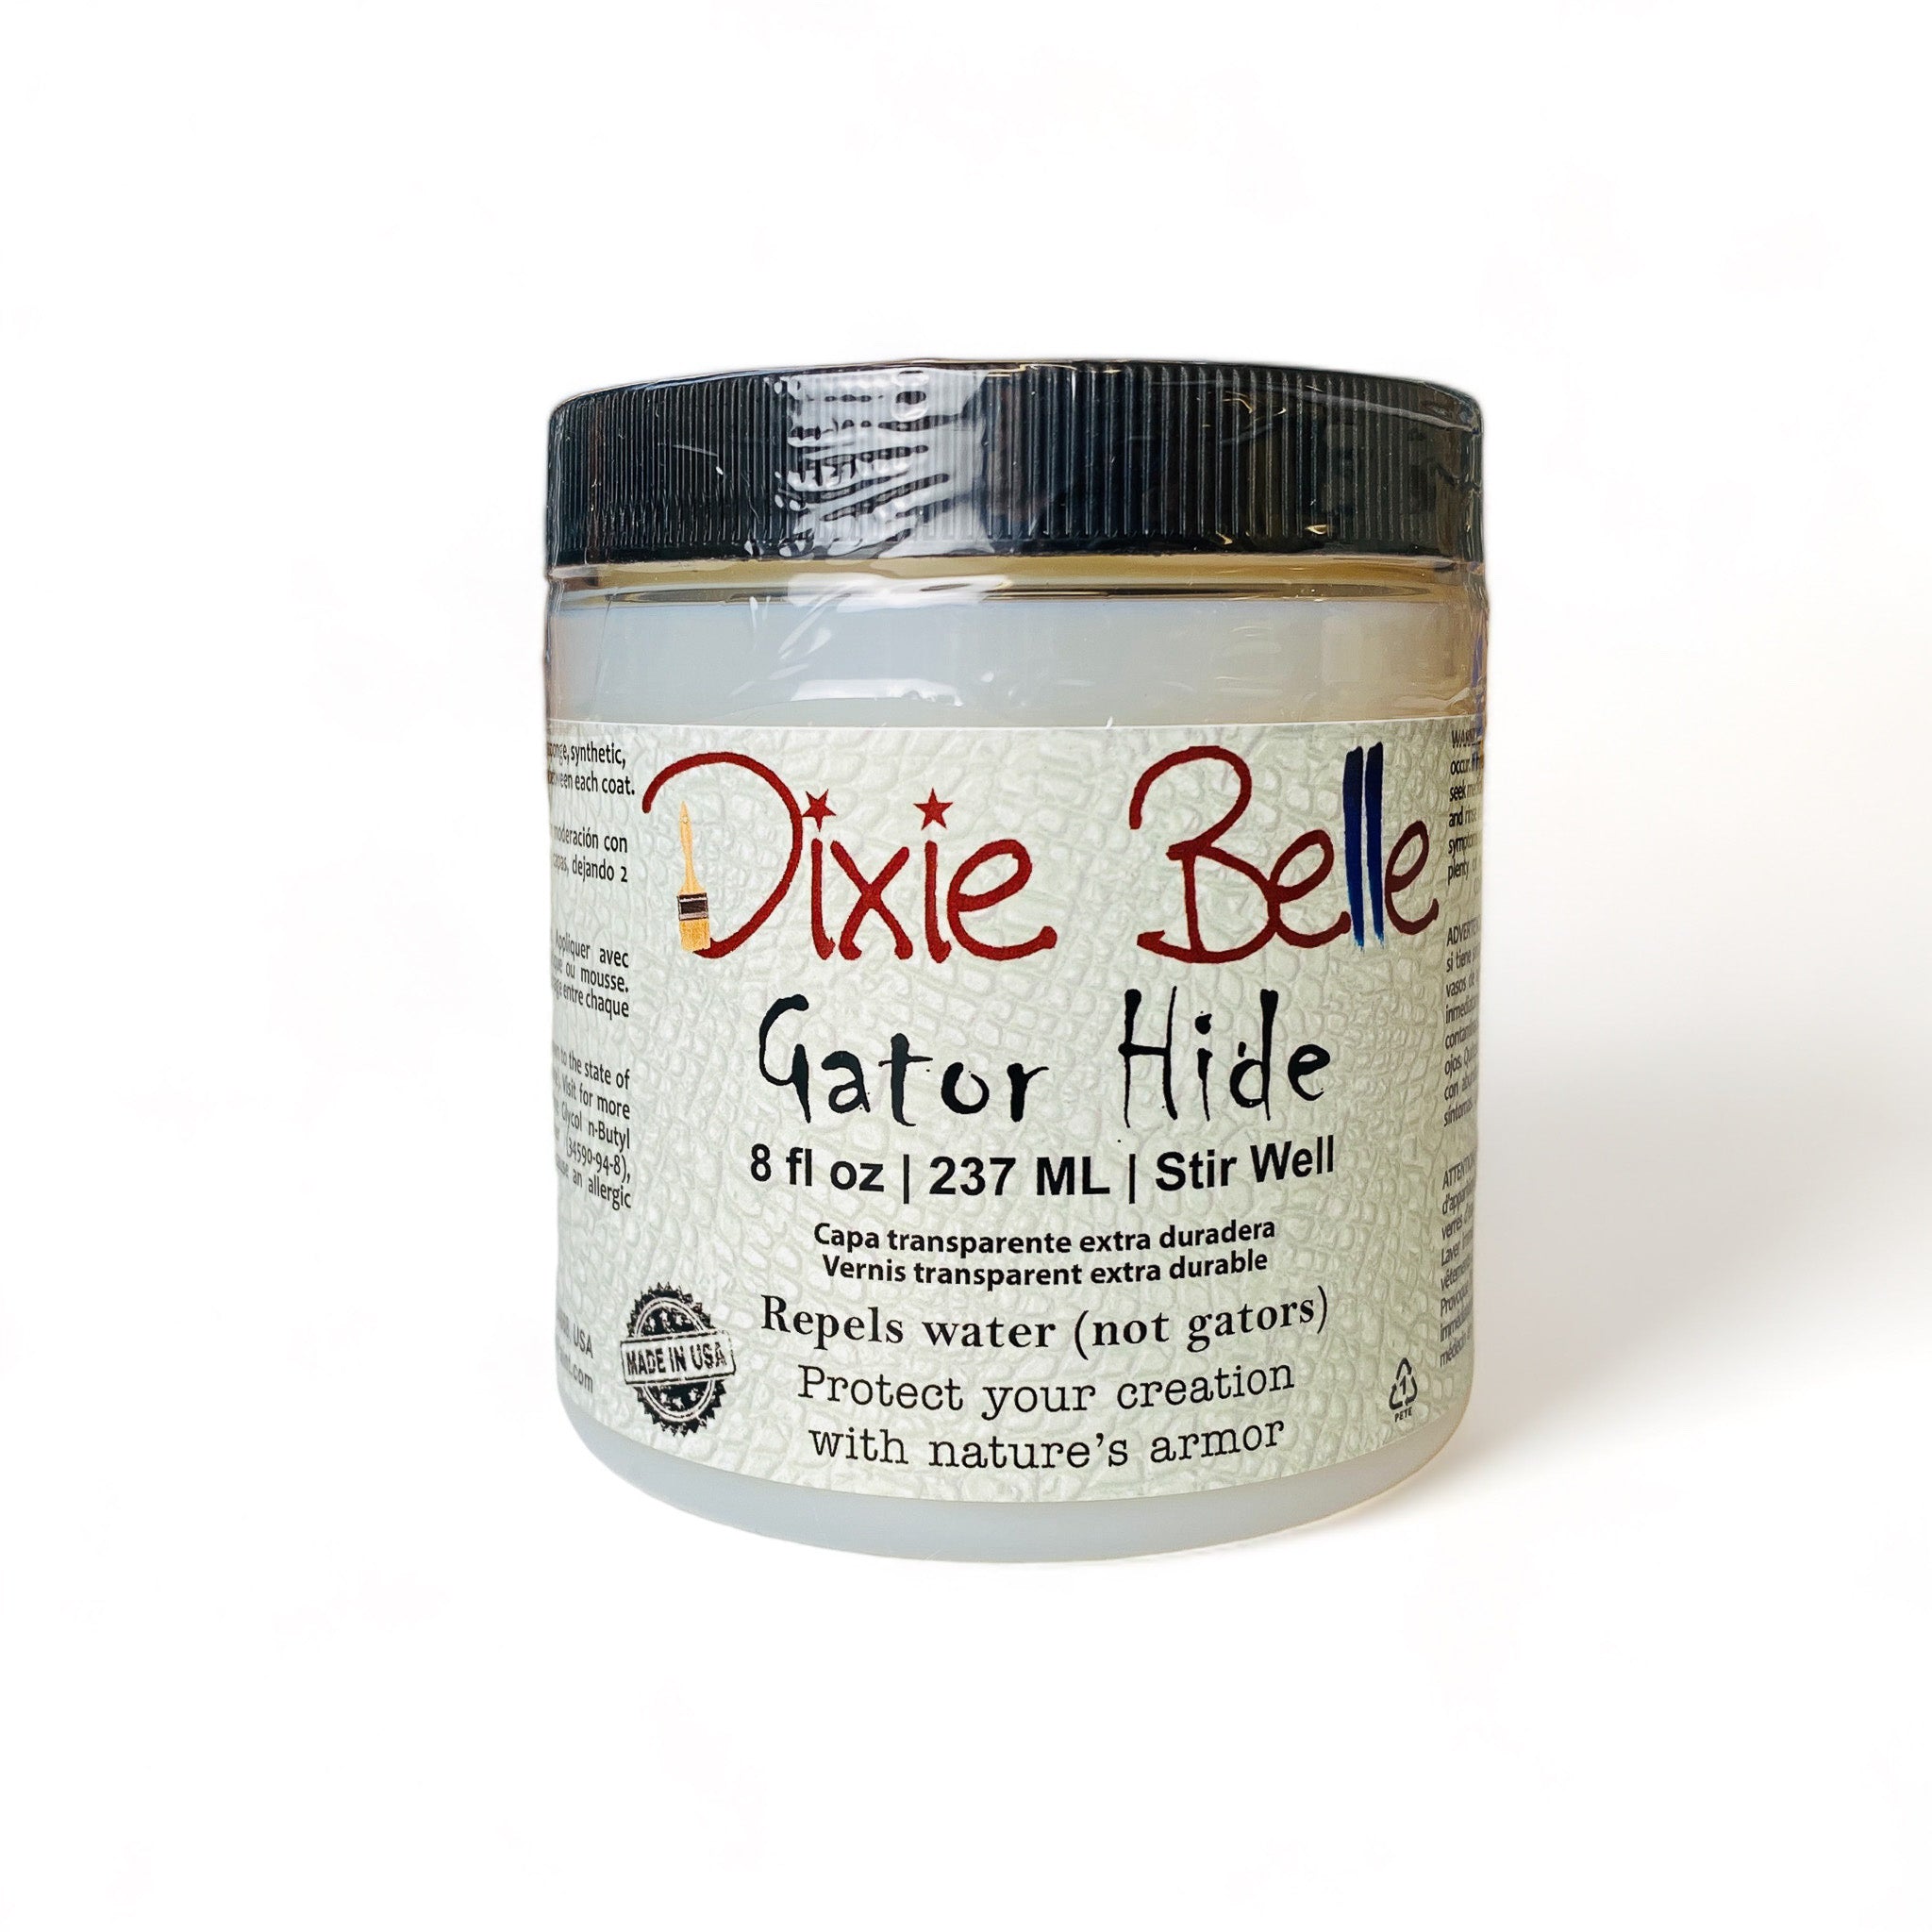 An 8oz container of Dixie Belle's Gator Hide is against a white background.